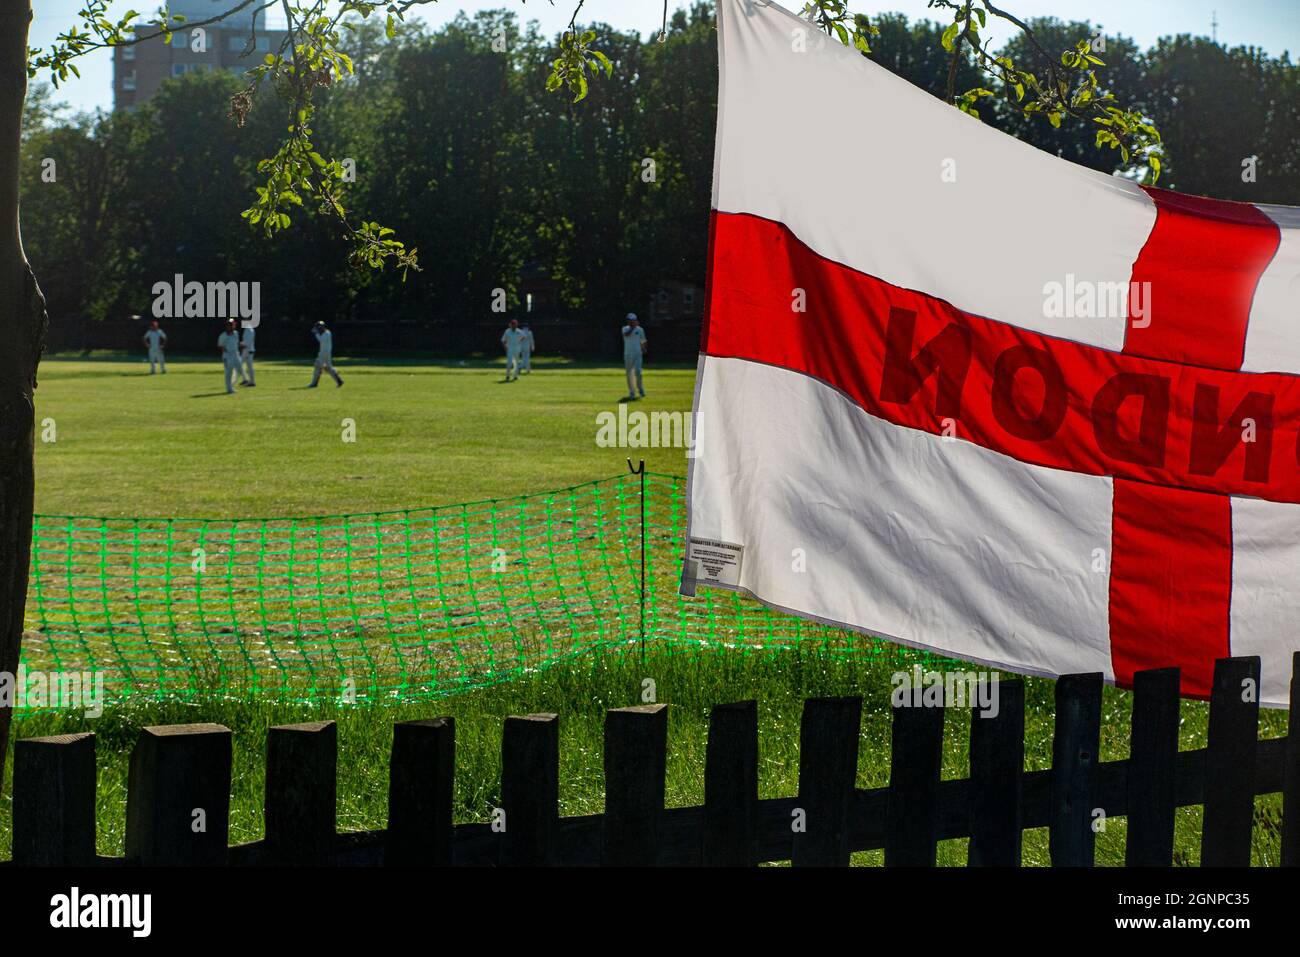 Grass roots cricket in a London park with a St George's flag Stock Photo